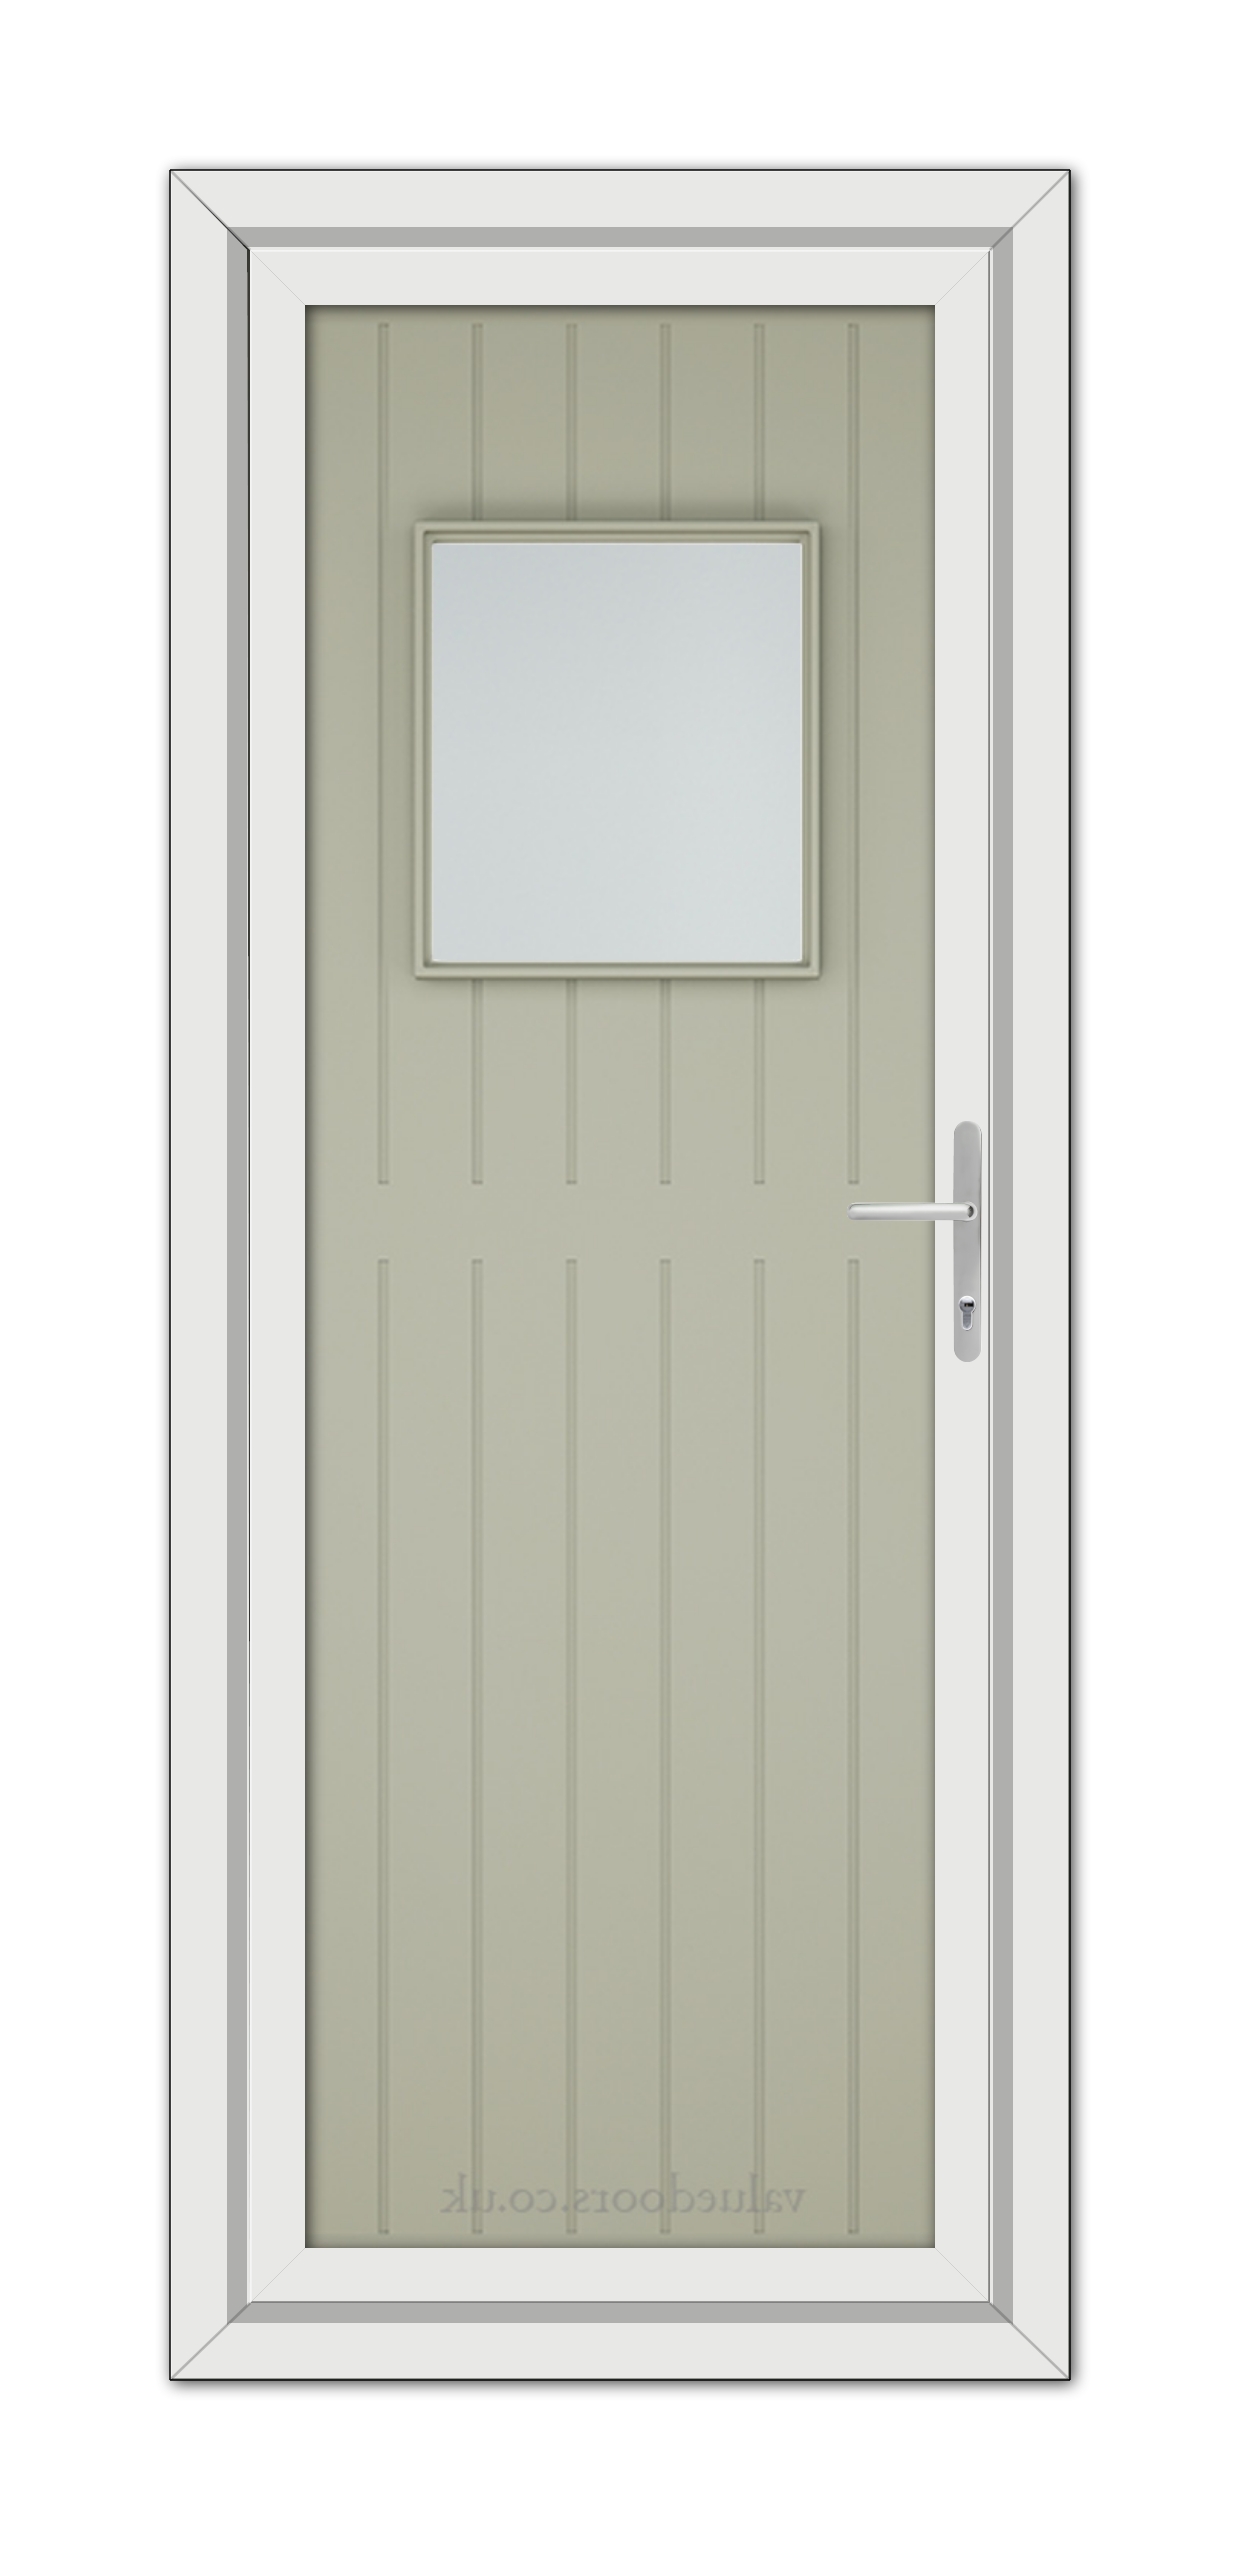 A modern Agate Grey Chatsworth uPVC Door with a vertical panel design and a small square window, framed by a white door frame, equipped with a silver handle.